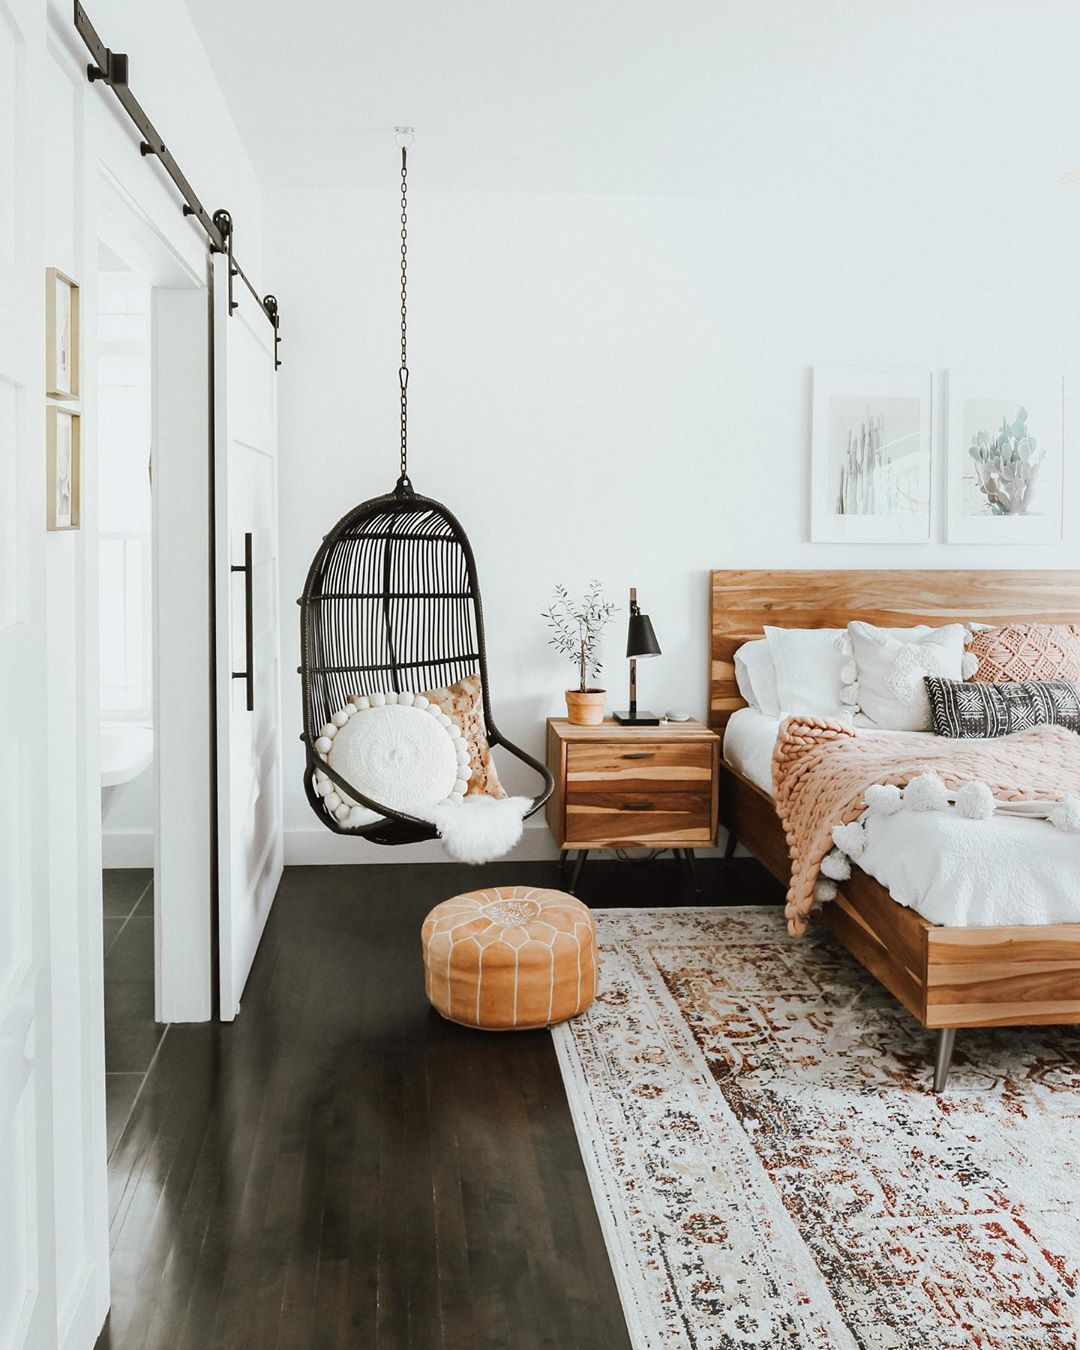 Links + Loves: A Linen Top for $10 + Boho Bedroom Perfection